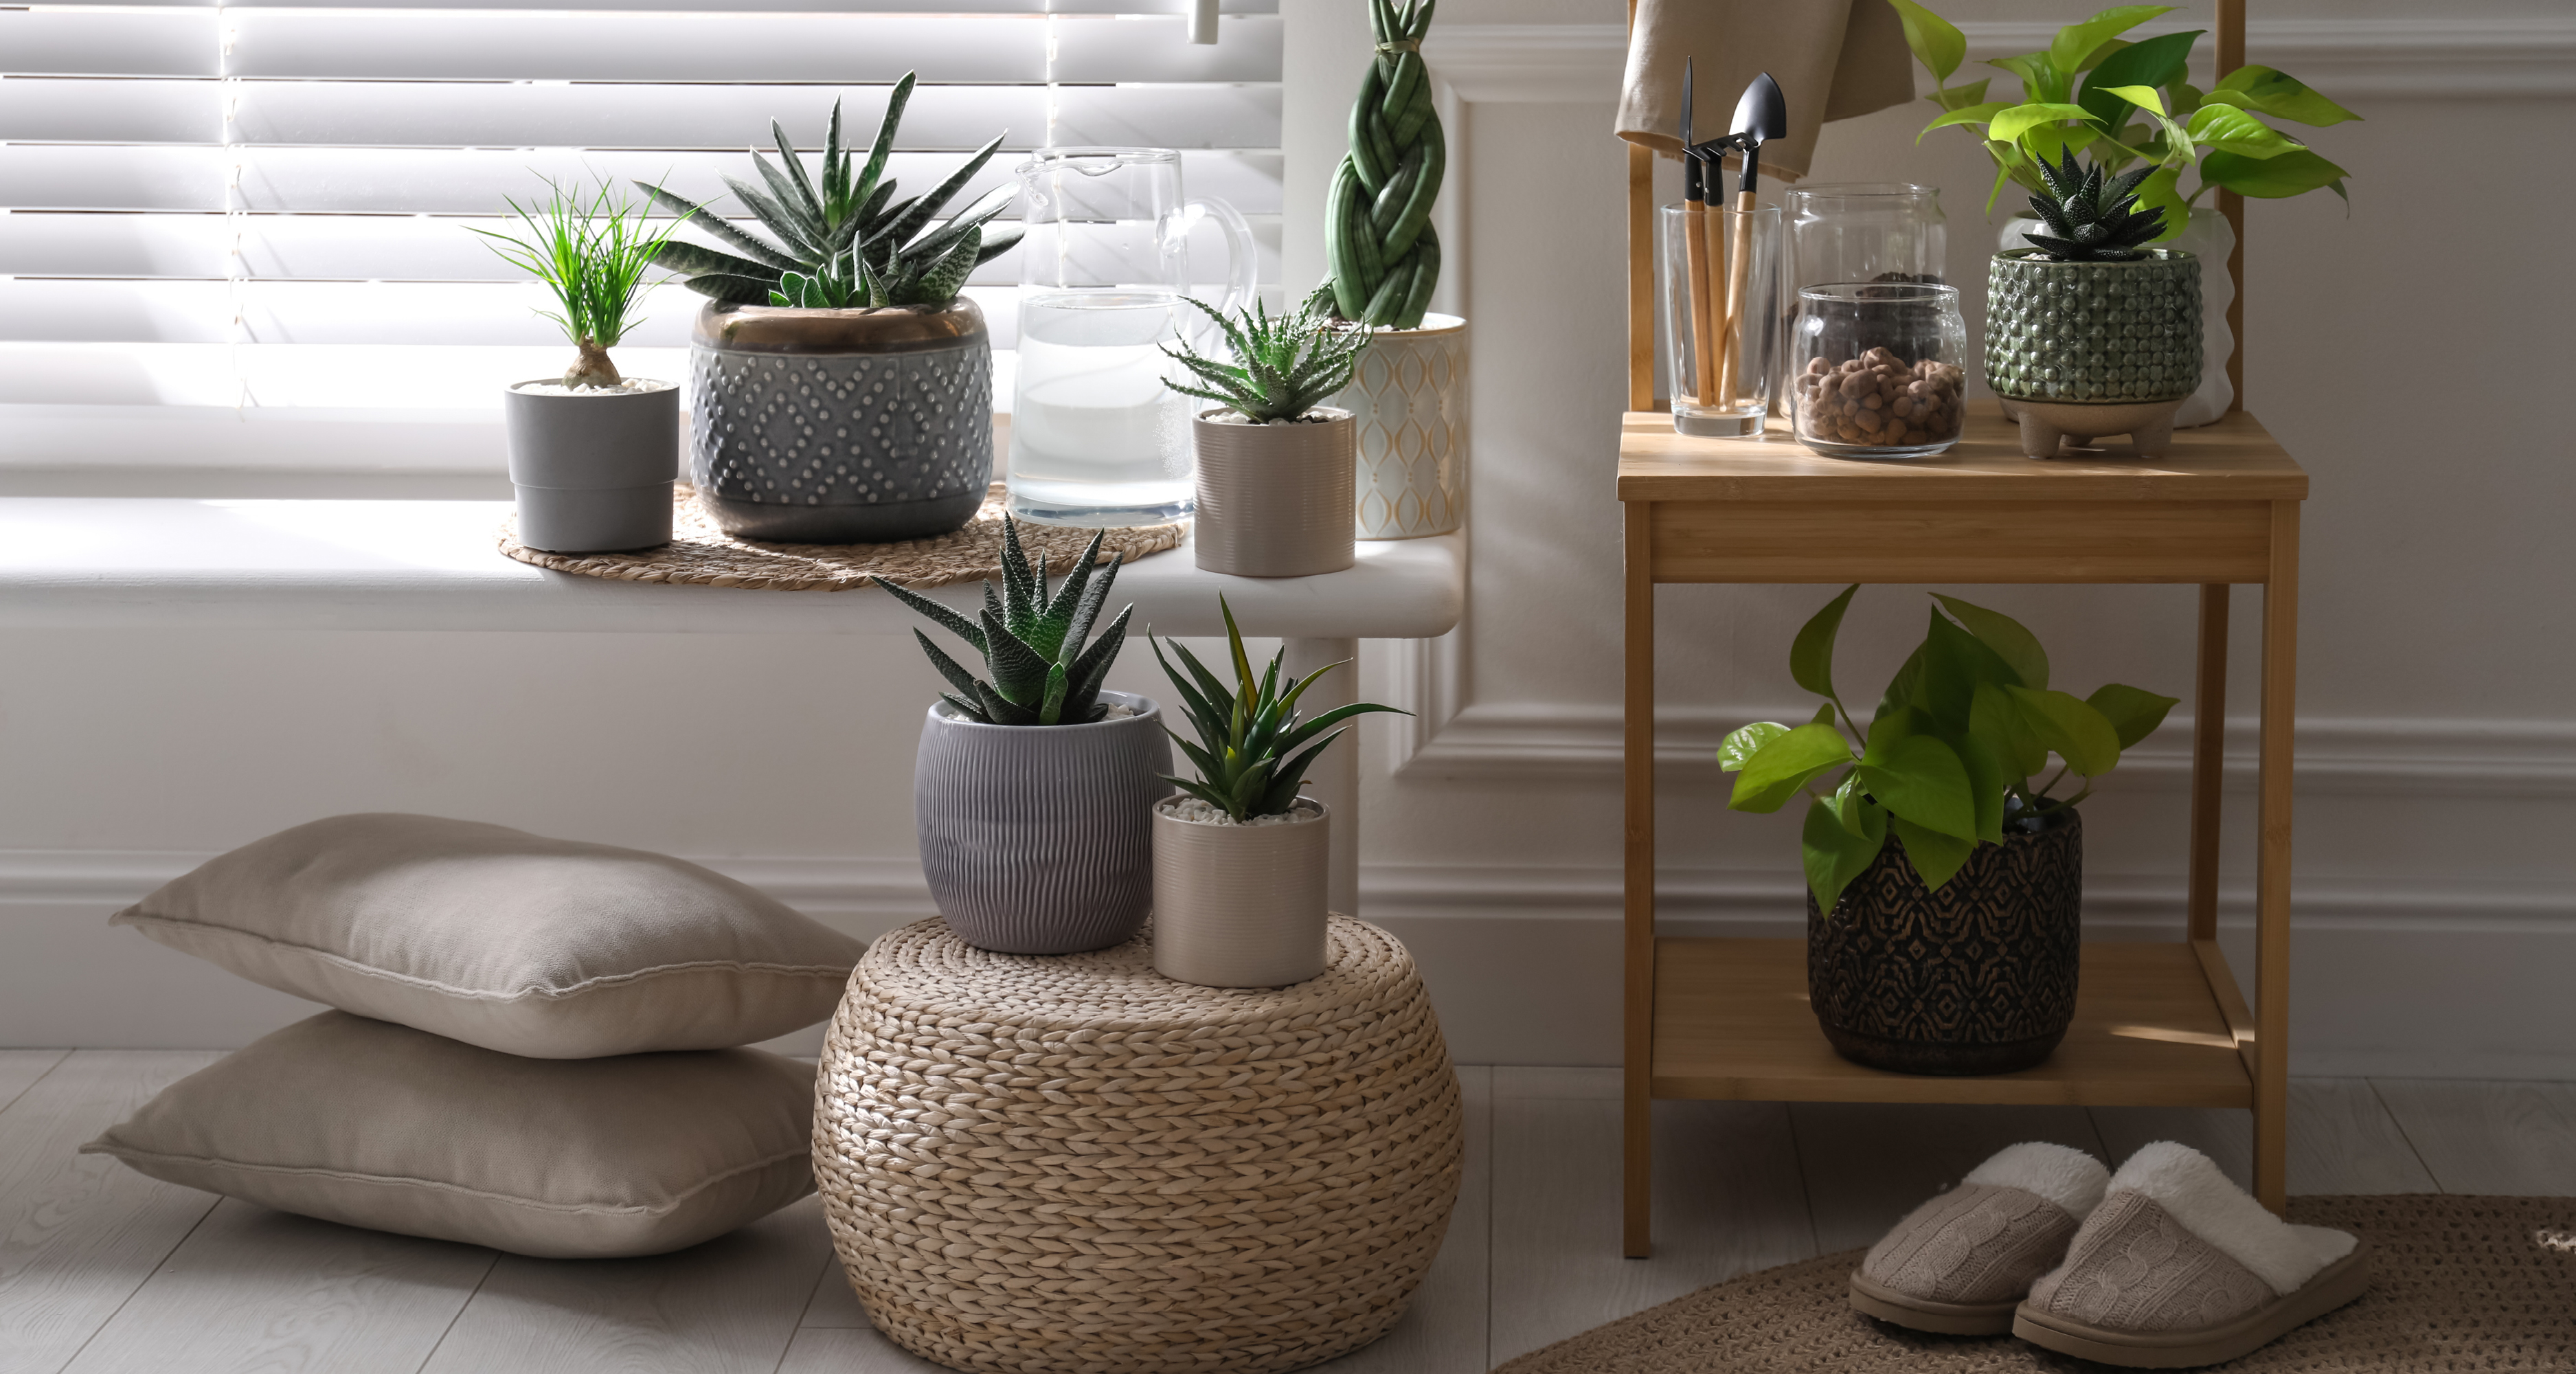 photo courtesy of Istock
plants, plant care, indoor plants, apartment plant
hdr-blog-winter-plant-care-istock-1319187470-2022